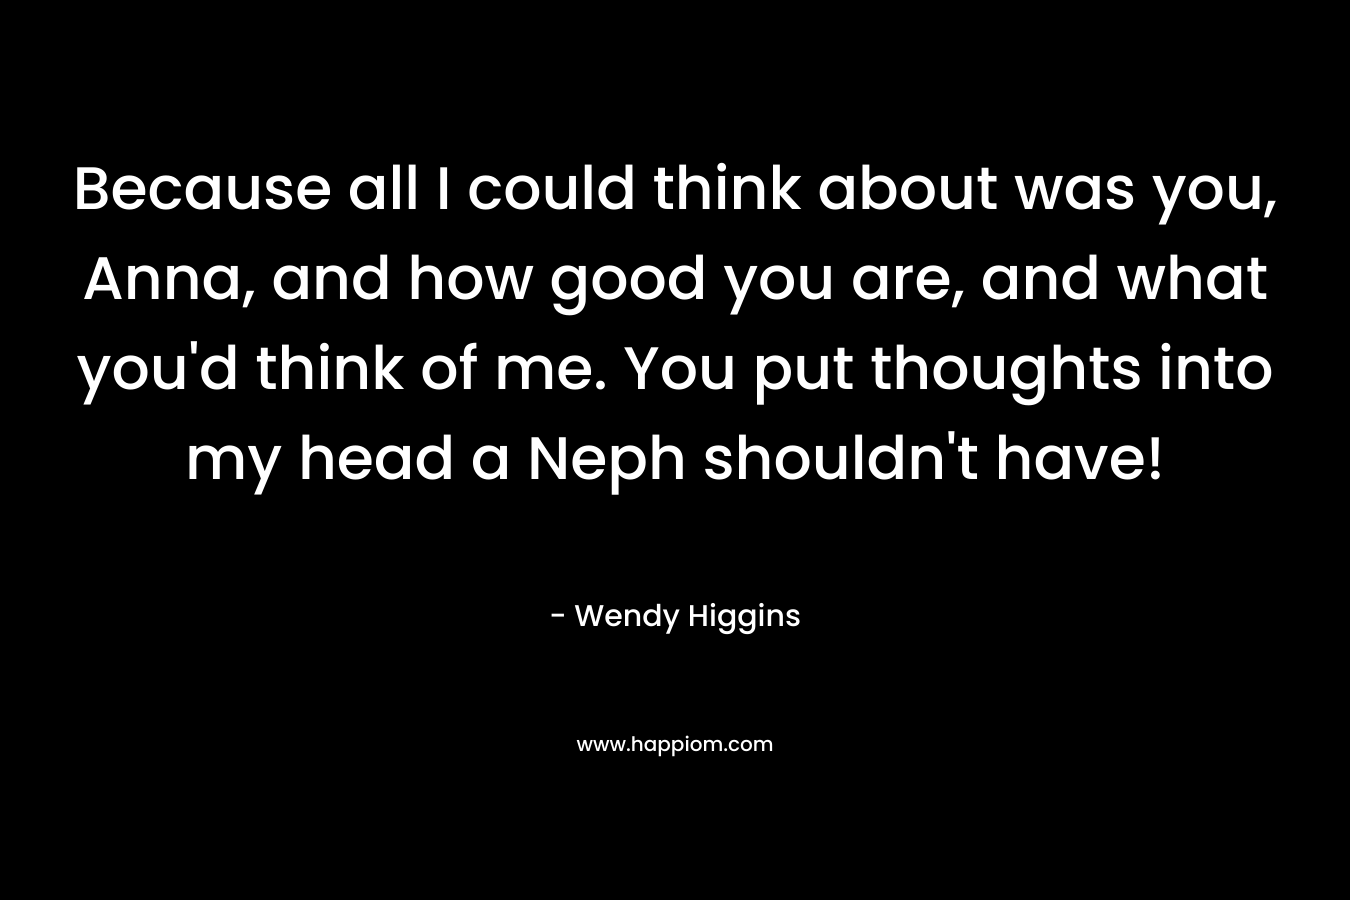 Because all I could think about was you, Anna, and how good you are, and what you’d think of me. You put thoughts into my head a Neph shouldn’t have! – Wendy Higgins